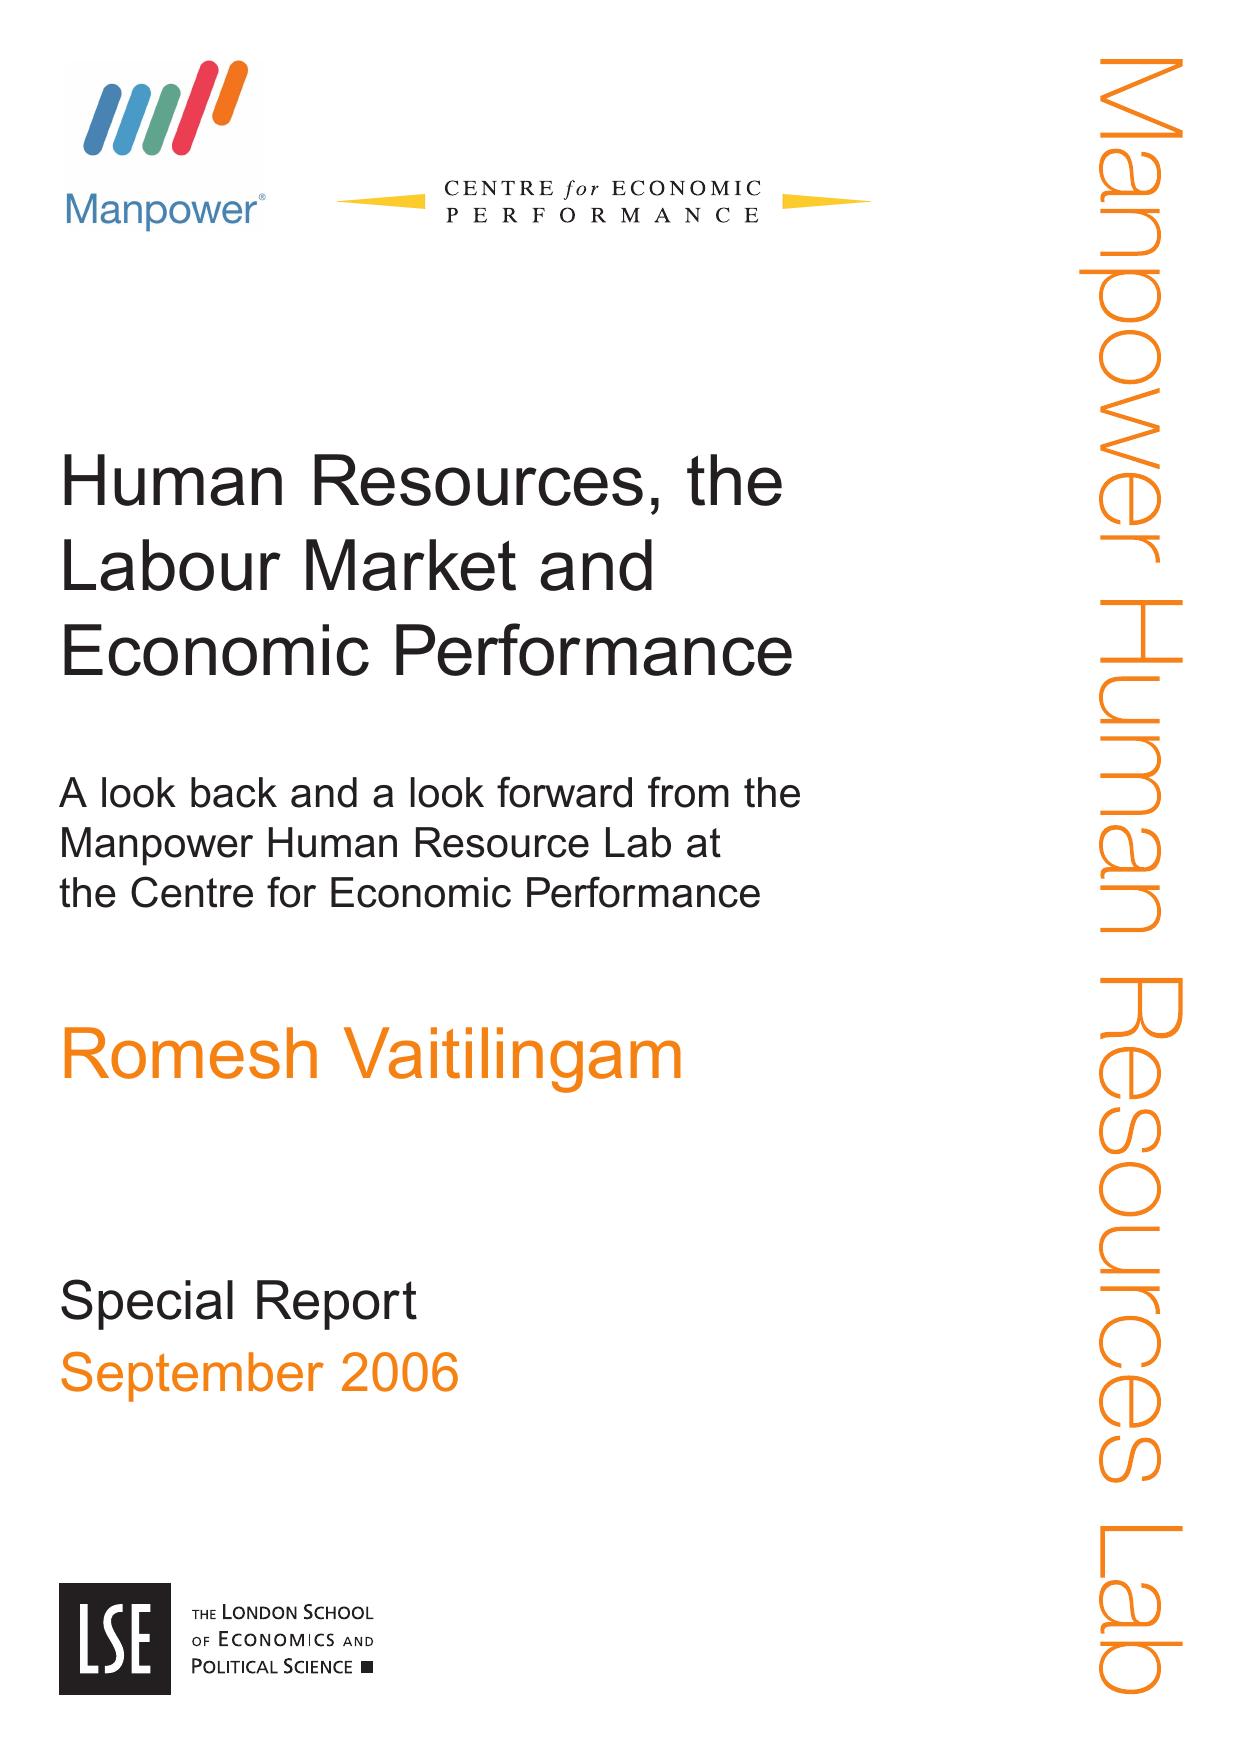 Human Resources, the Labour Market and Economic Performance